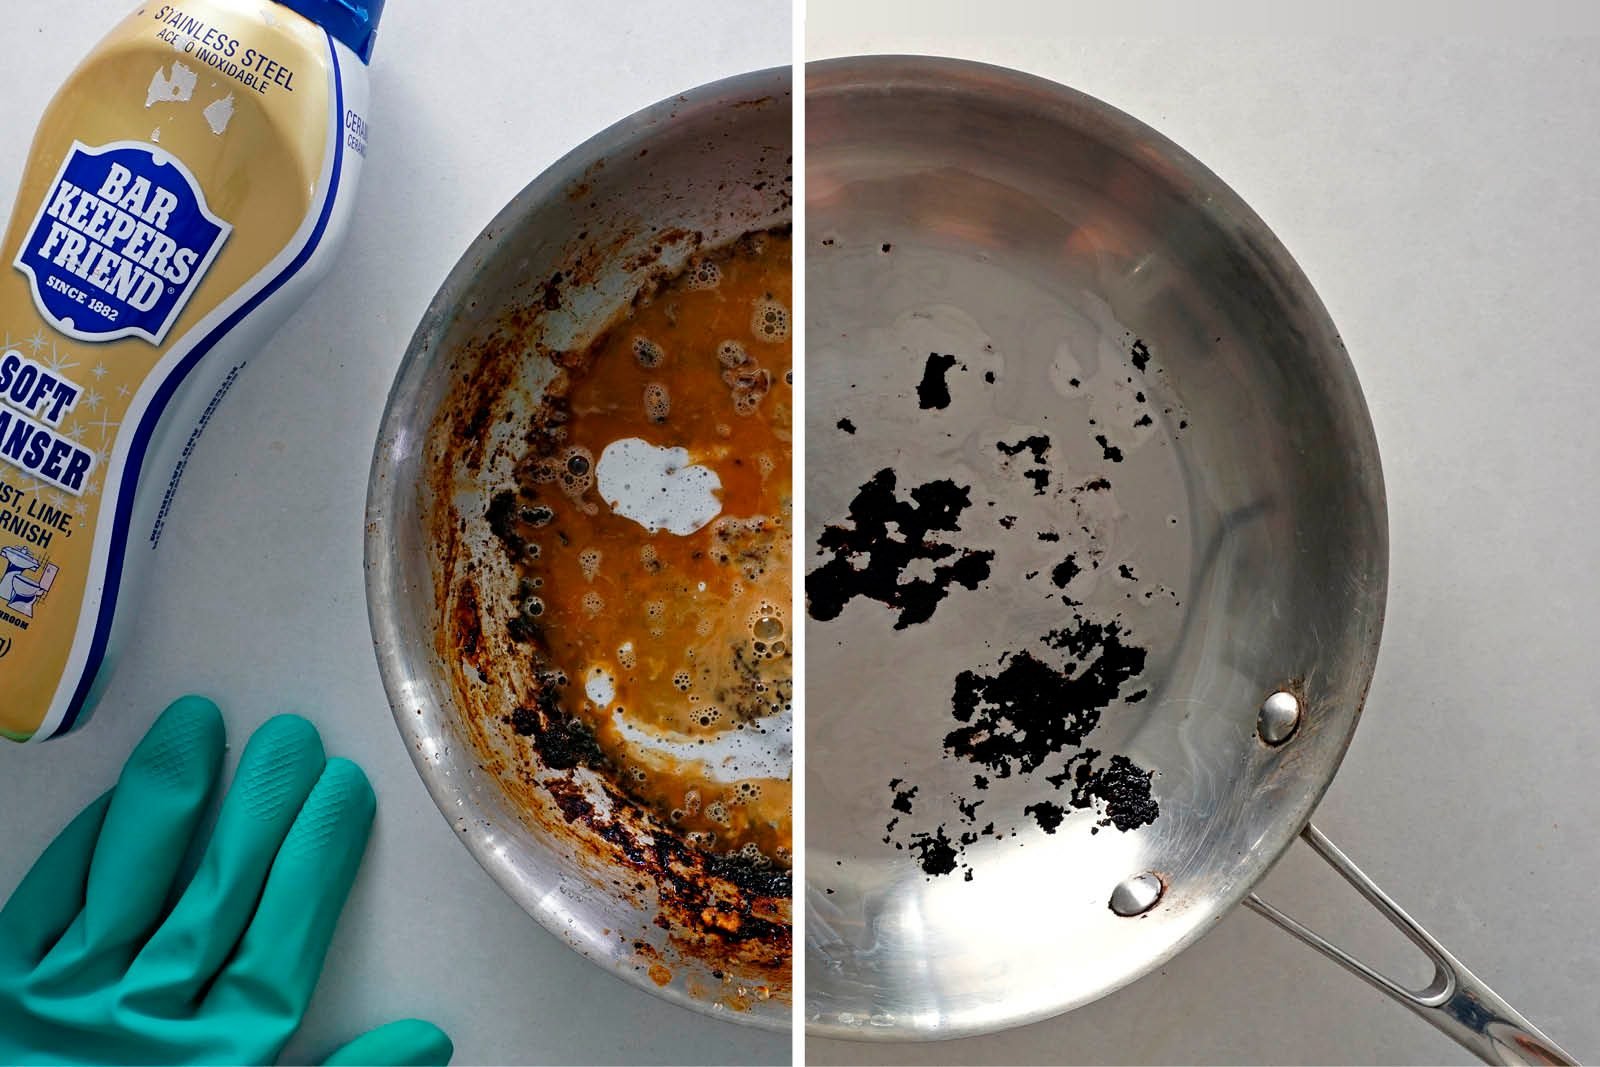 How to Clean a Burnt Pan: Five Different Methods